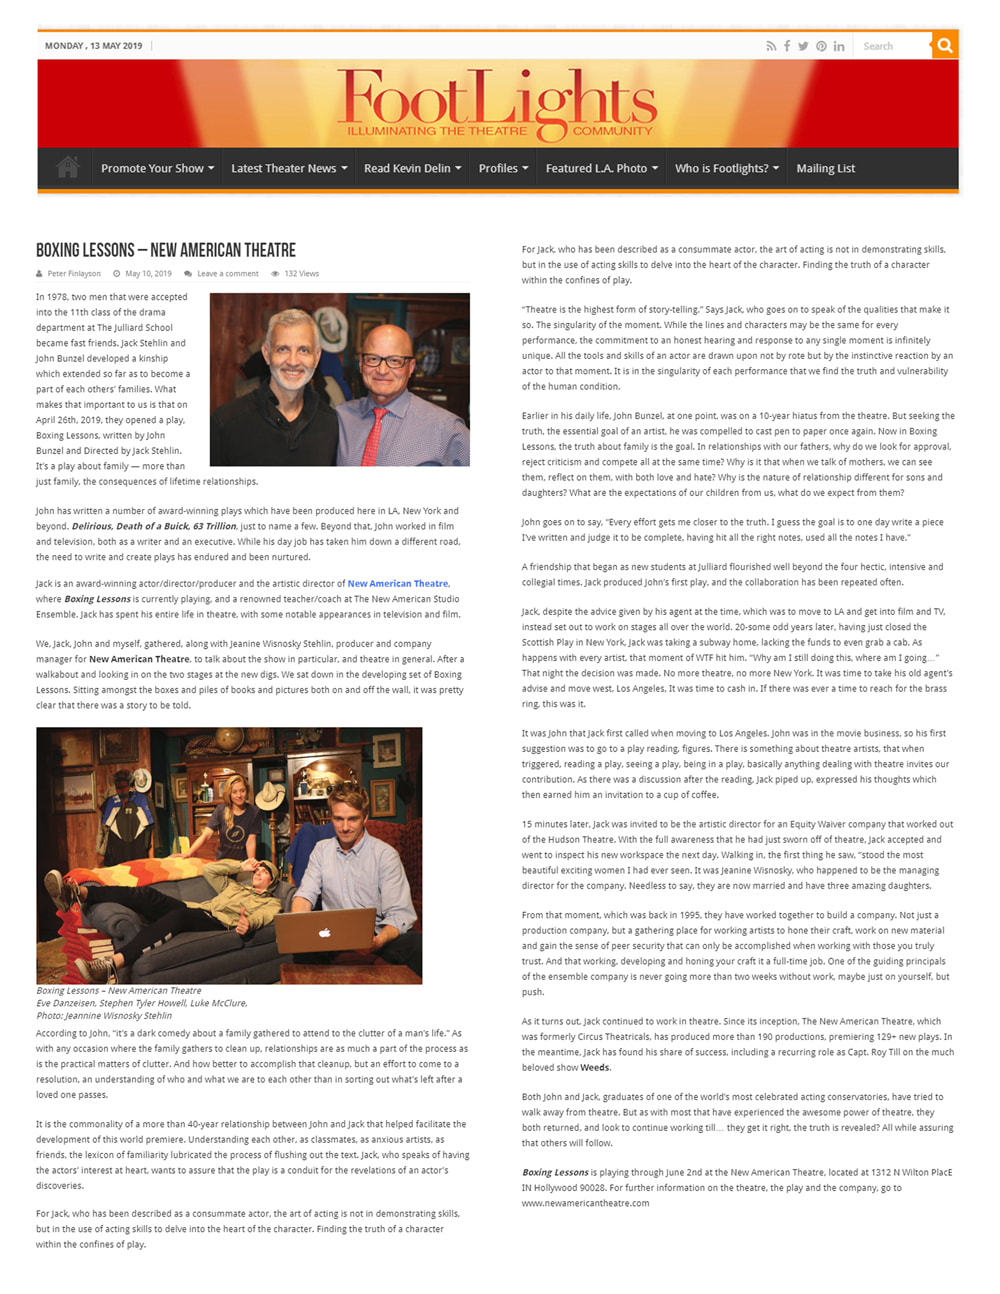 Footlights article about John Bunzel and Jack Stehlin